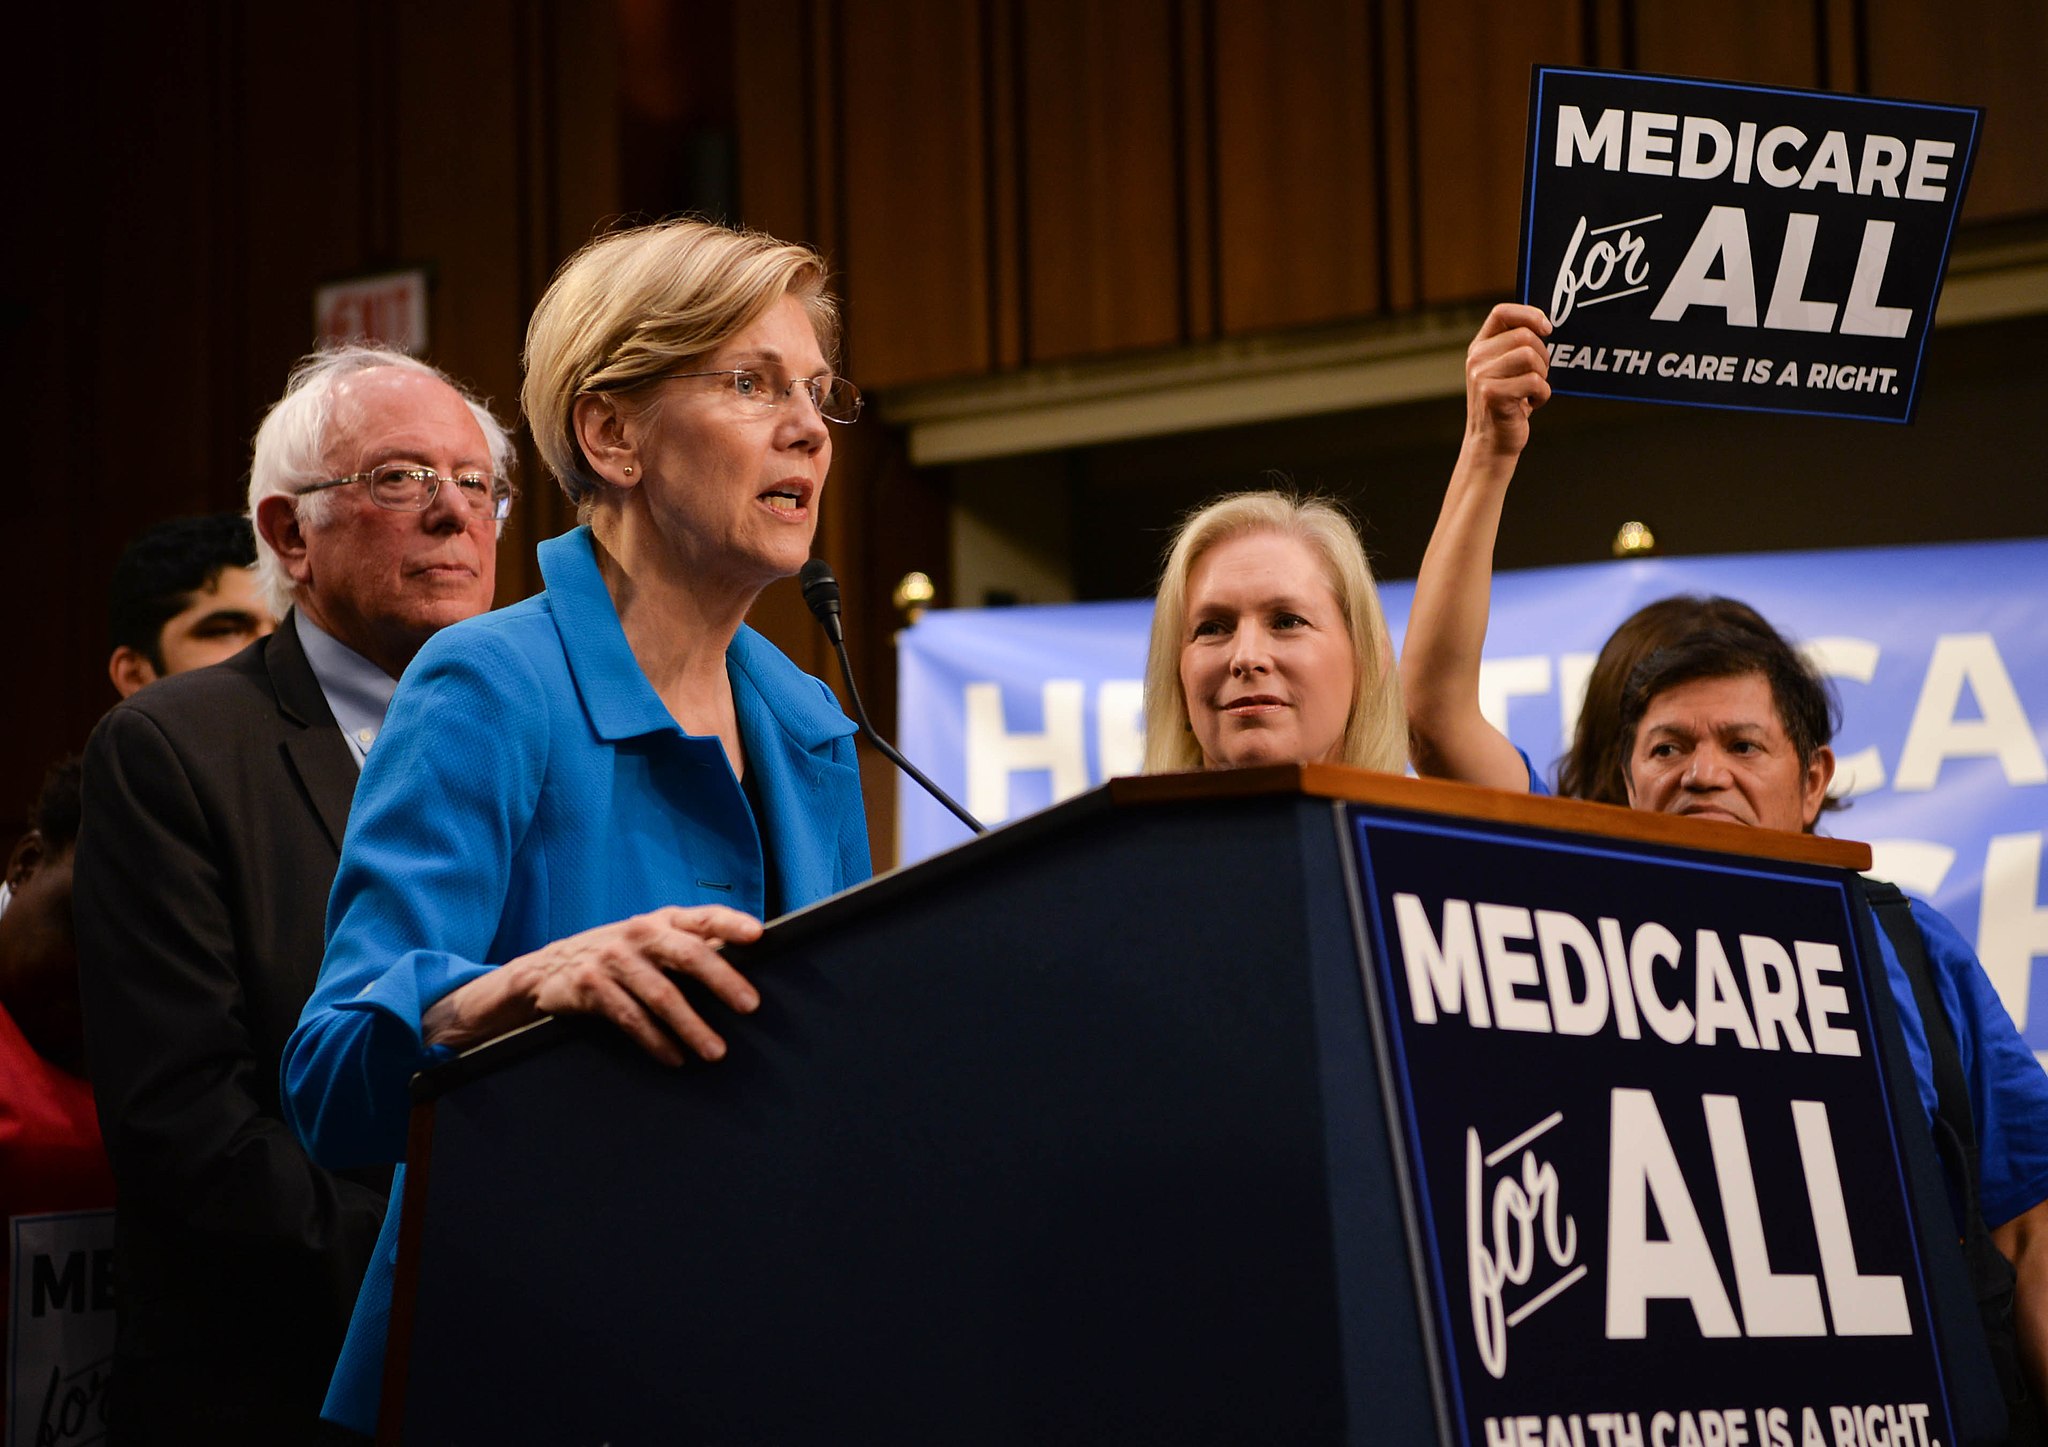 Elizabeth Warren and Bernie Sanders appear at a Medicare for All rally